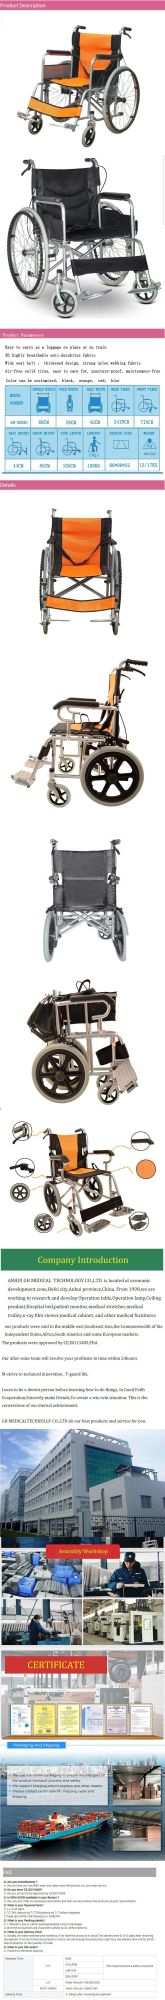 Best Price China Aluminium Alloy Light Weight Non Electric Foldable Manual Wheelchair